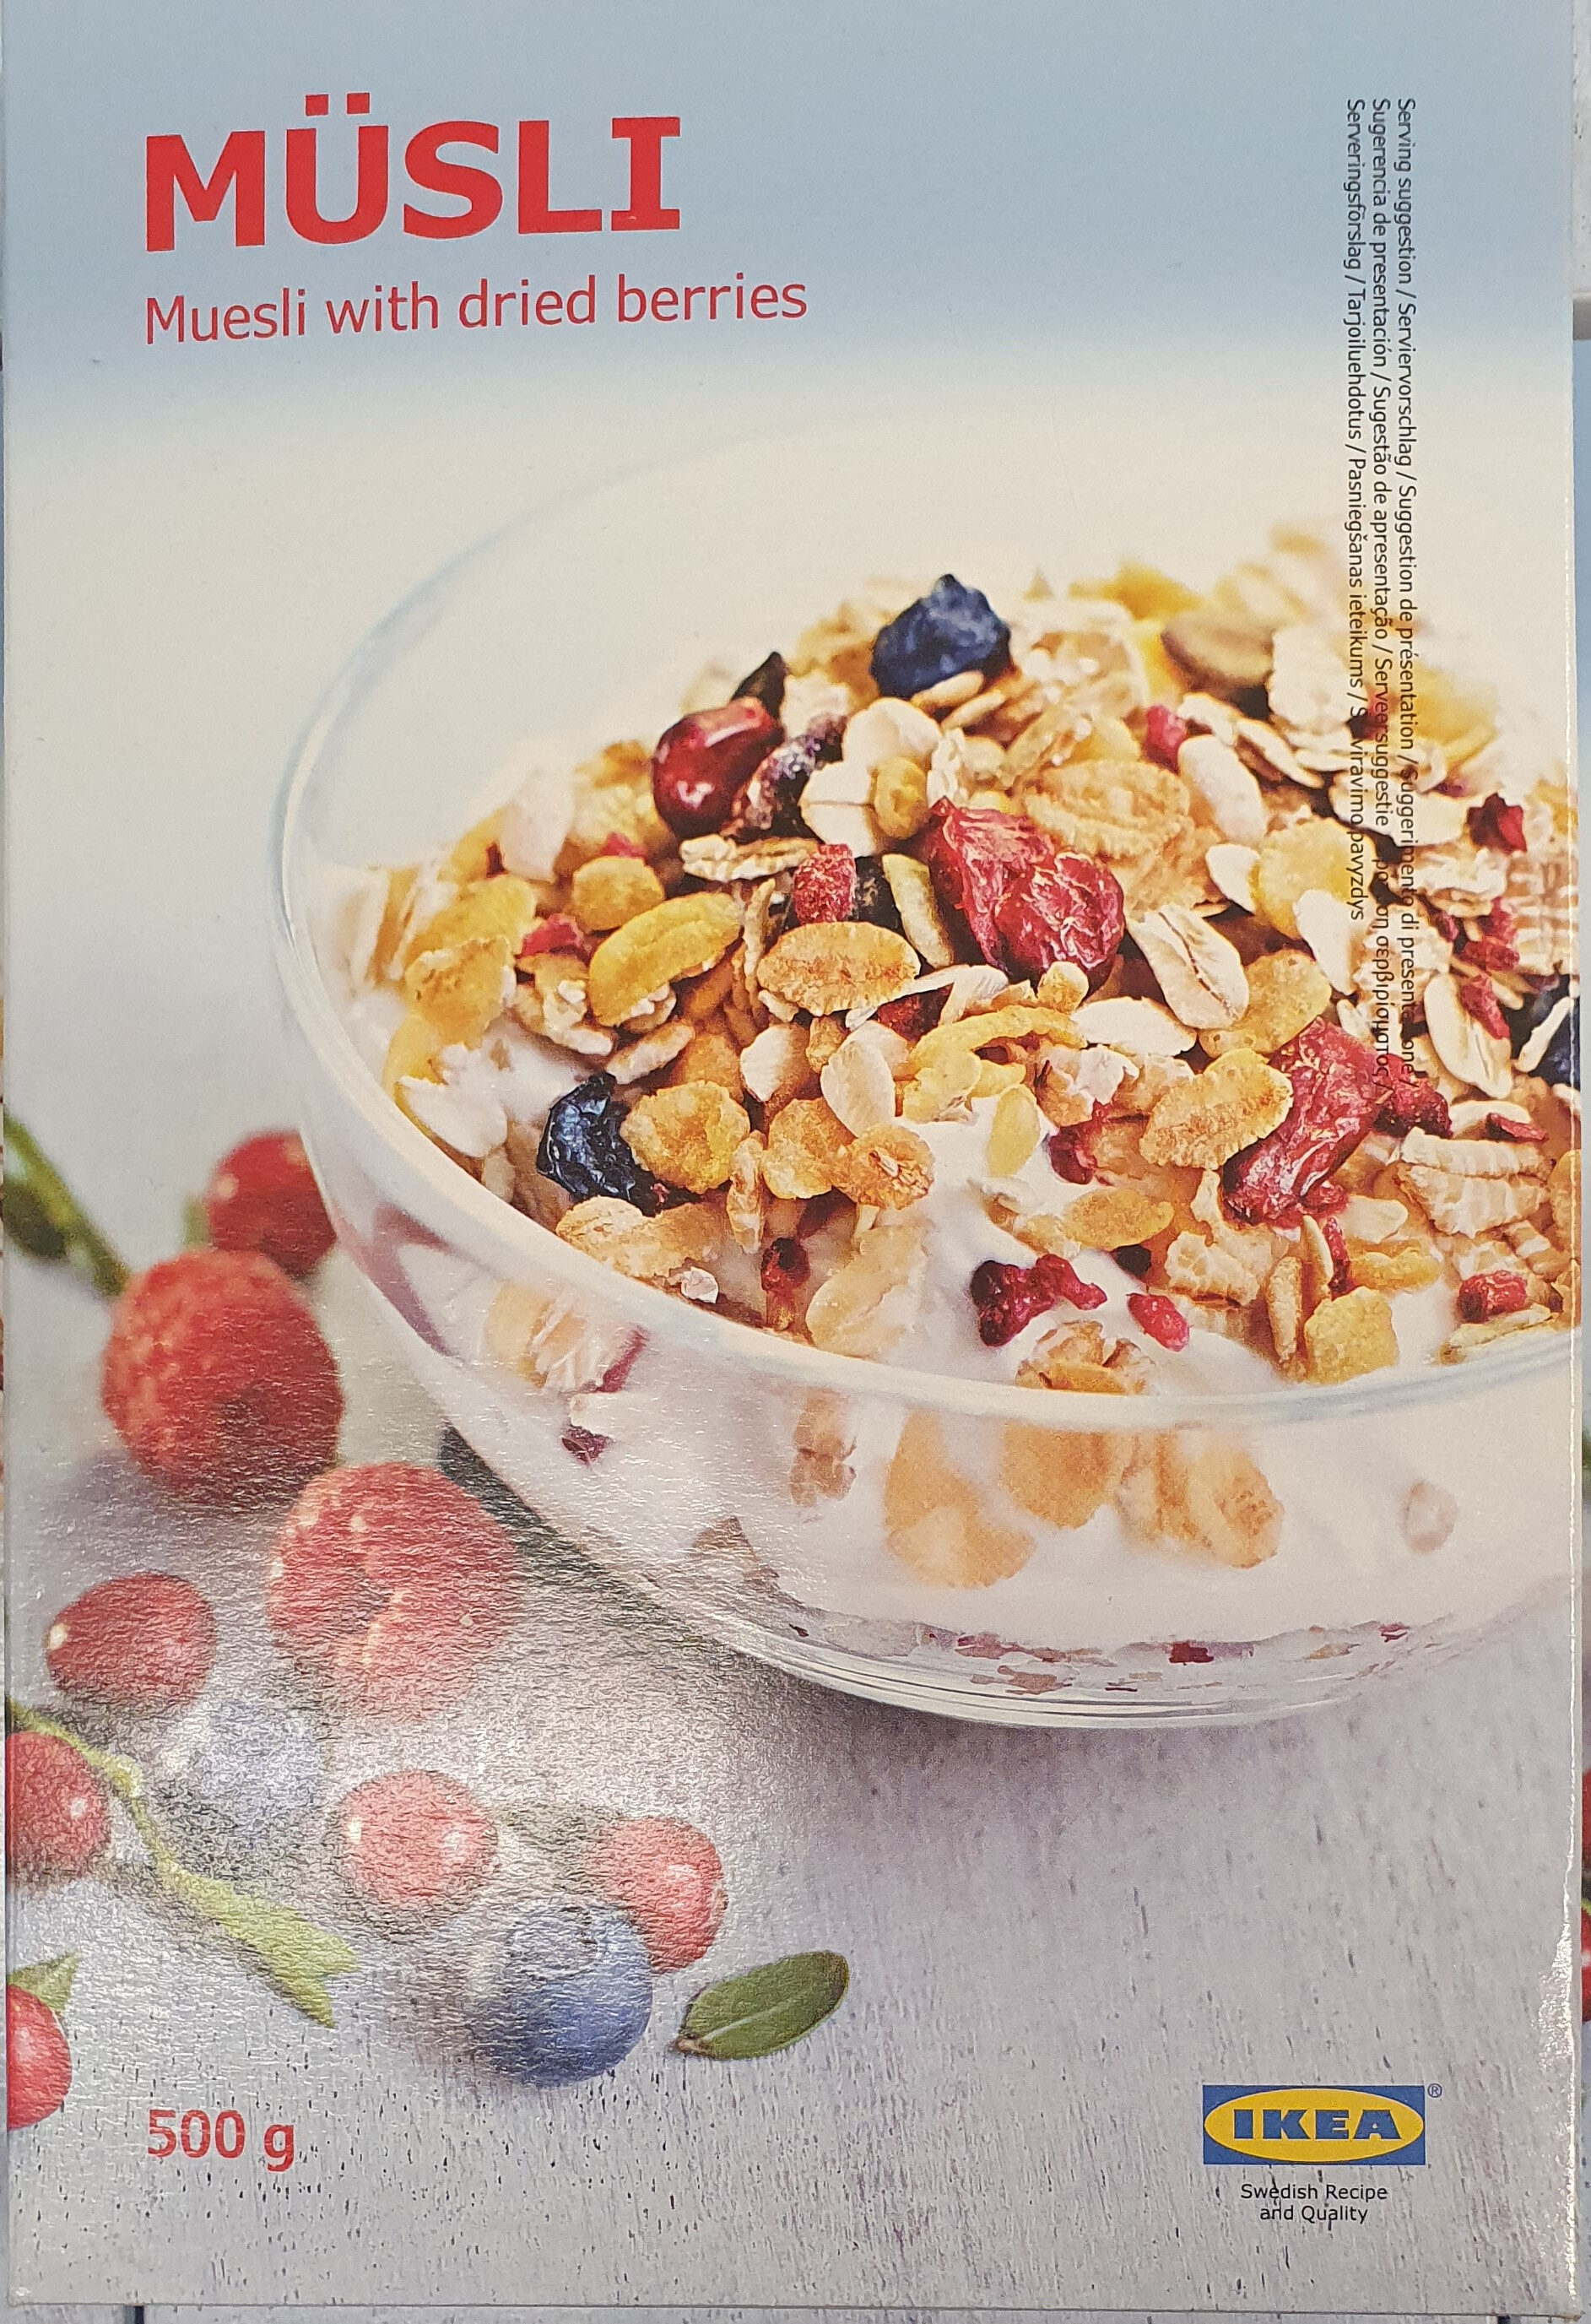 Muesli with dried berries - Product